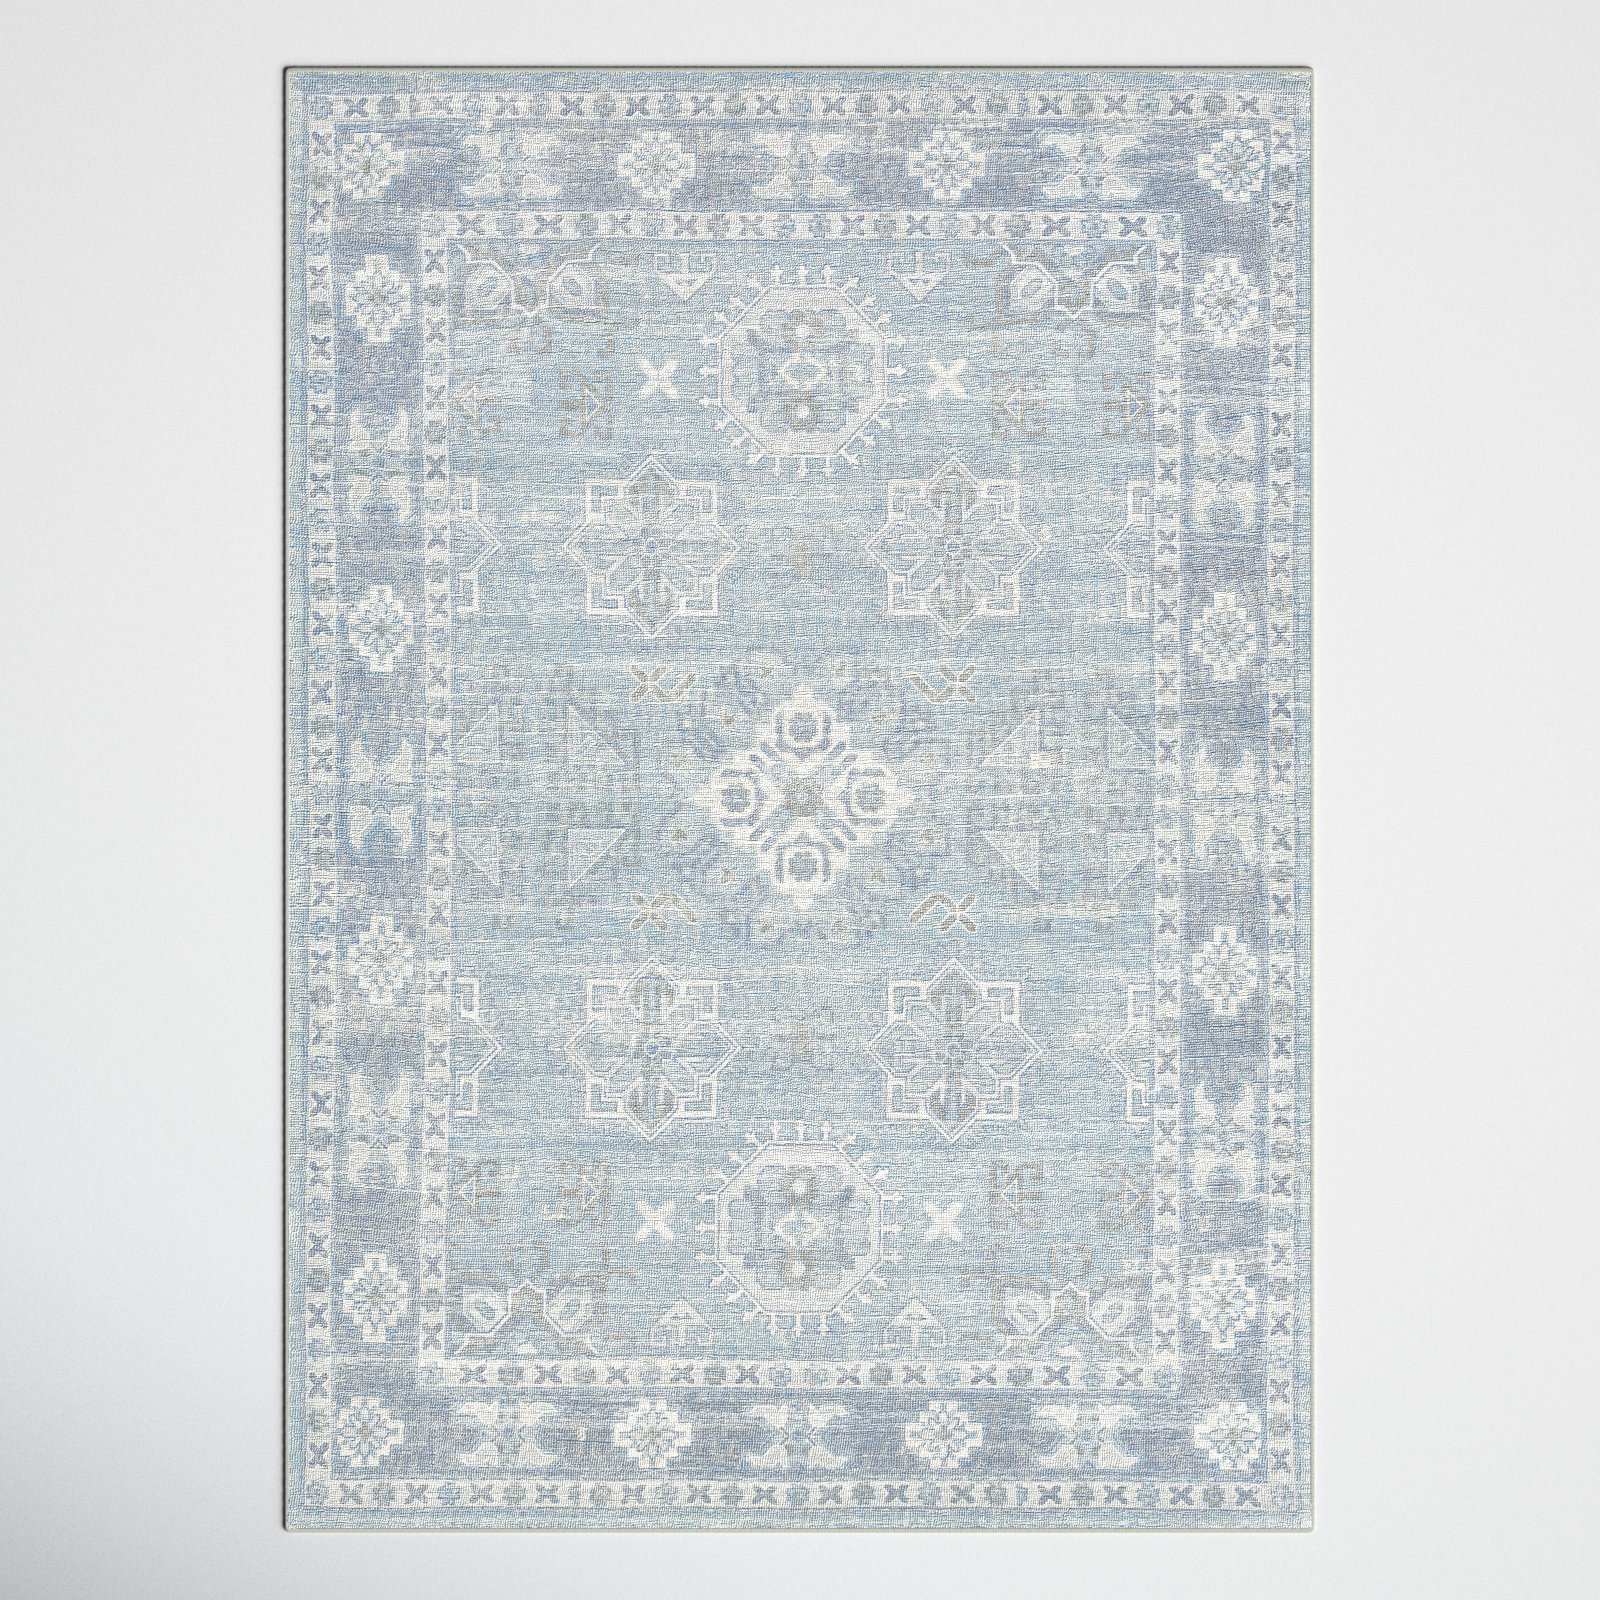 Tufted Rugs - White Dust From Backing